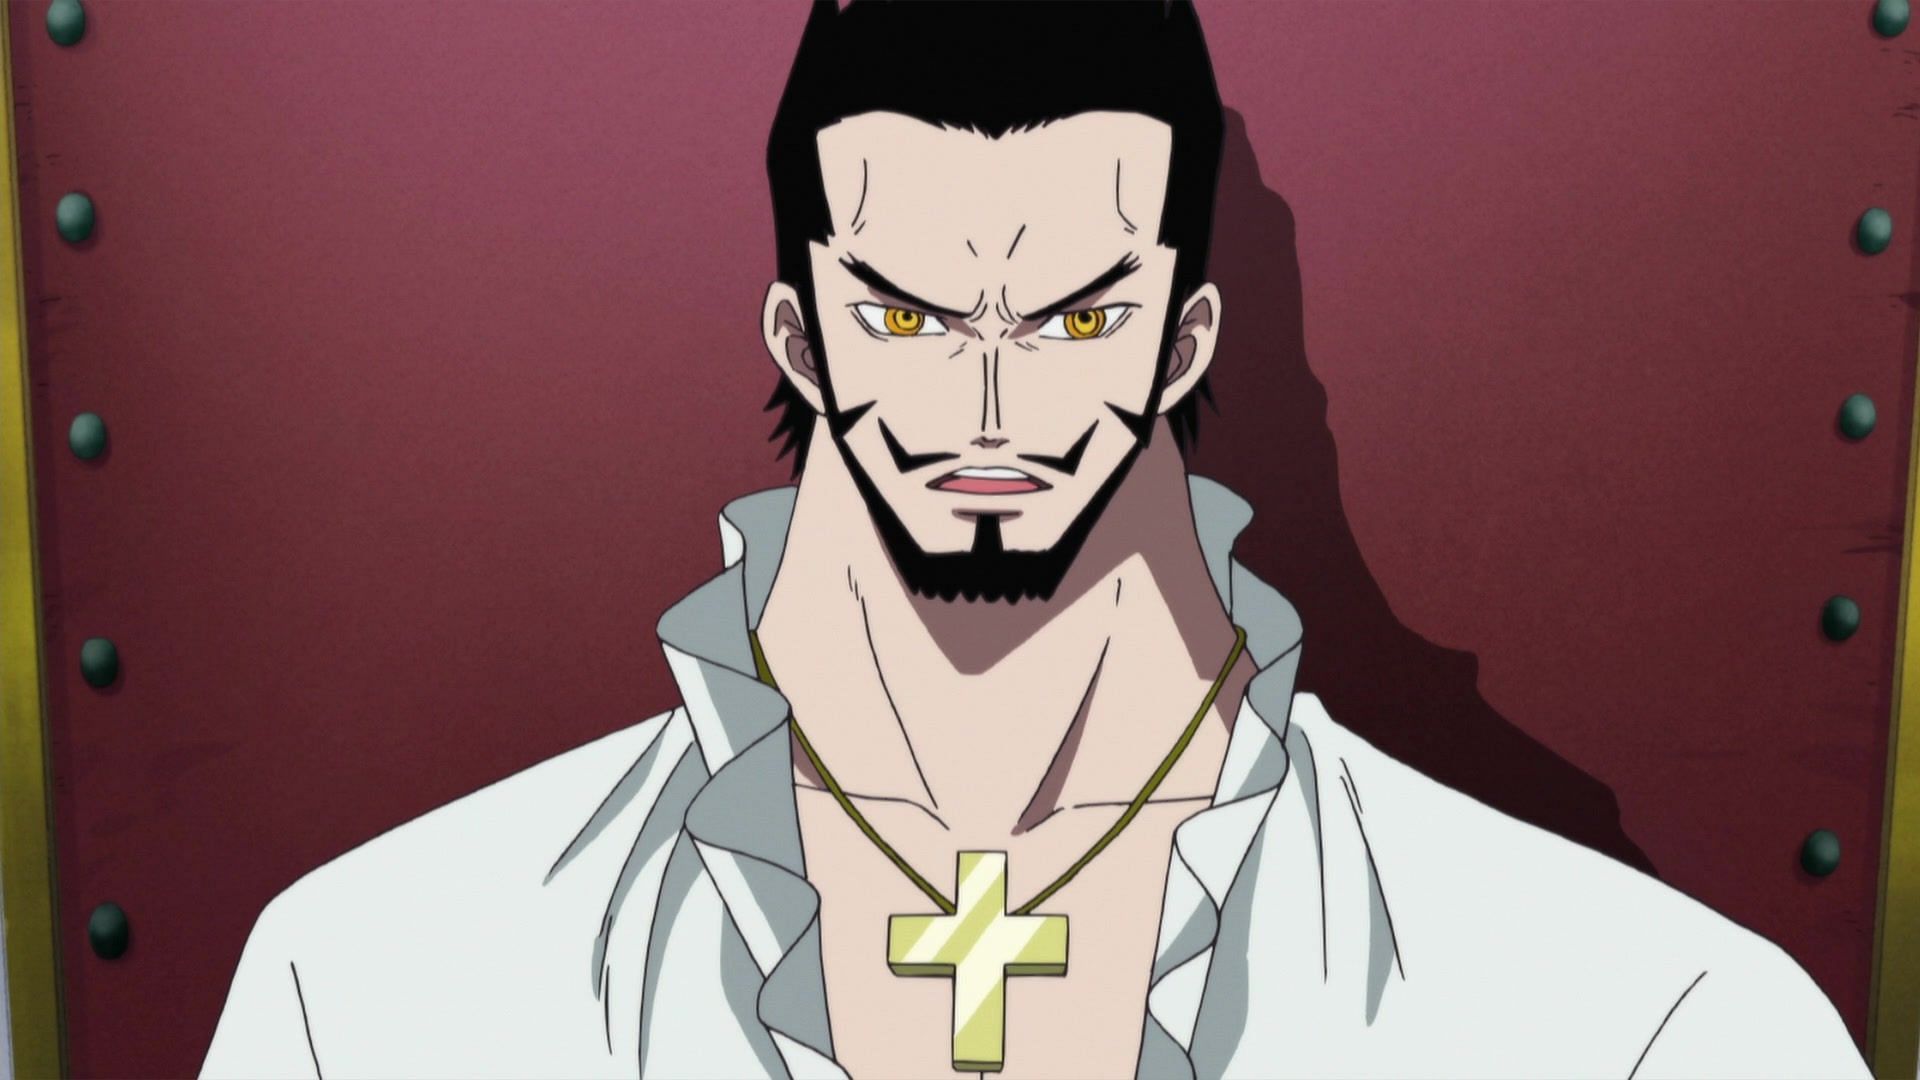 Mihawk as seen in the show (Image via Toei Animation)